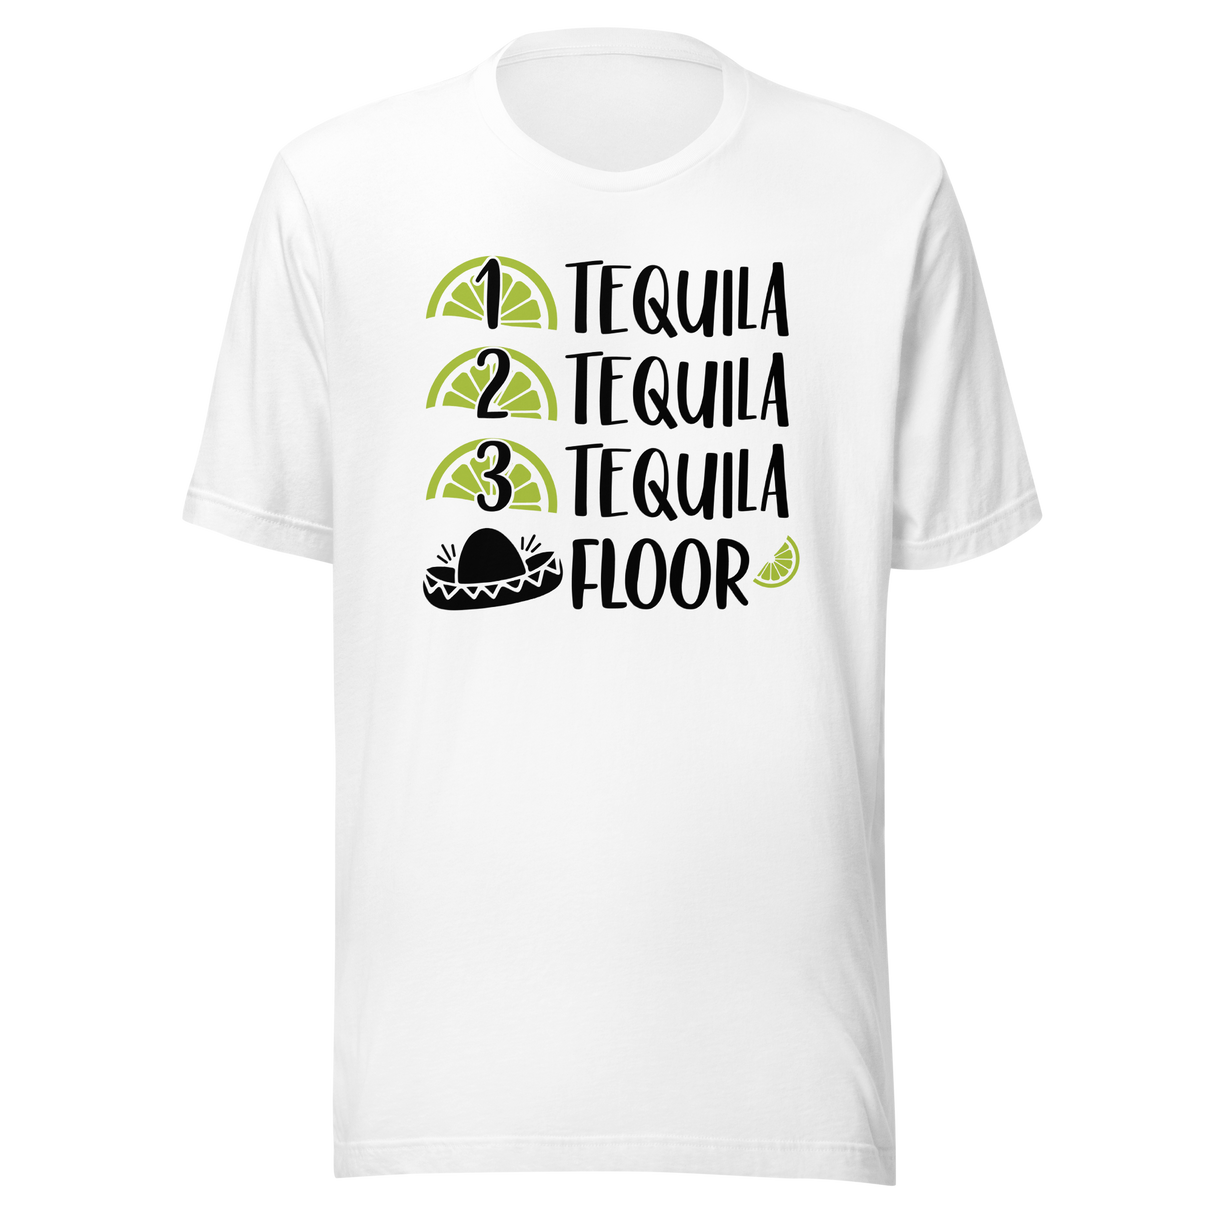 One Tequila Two Tequila Three Tequila Floor - Food Tee - Funny T-Shirt - Tequila Tee - Humor T-Shirt - Quirky Tee